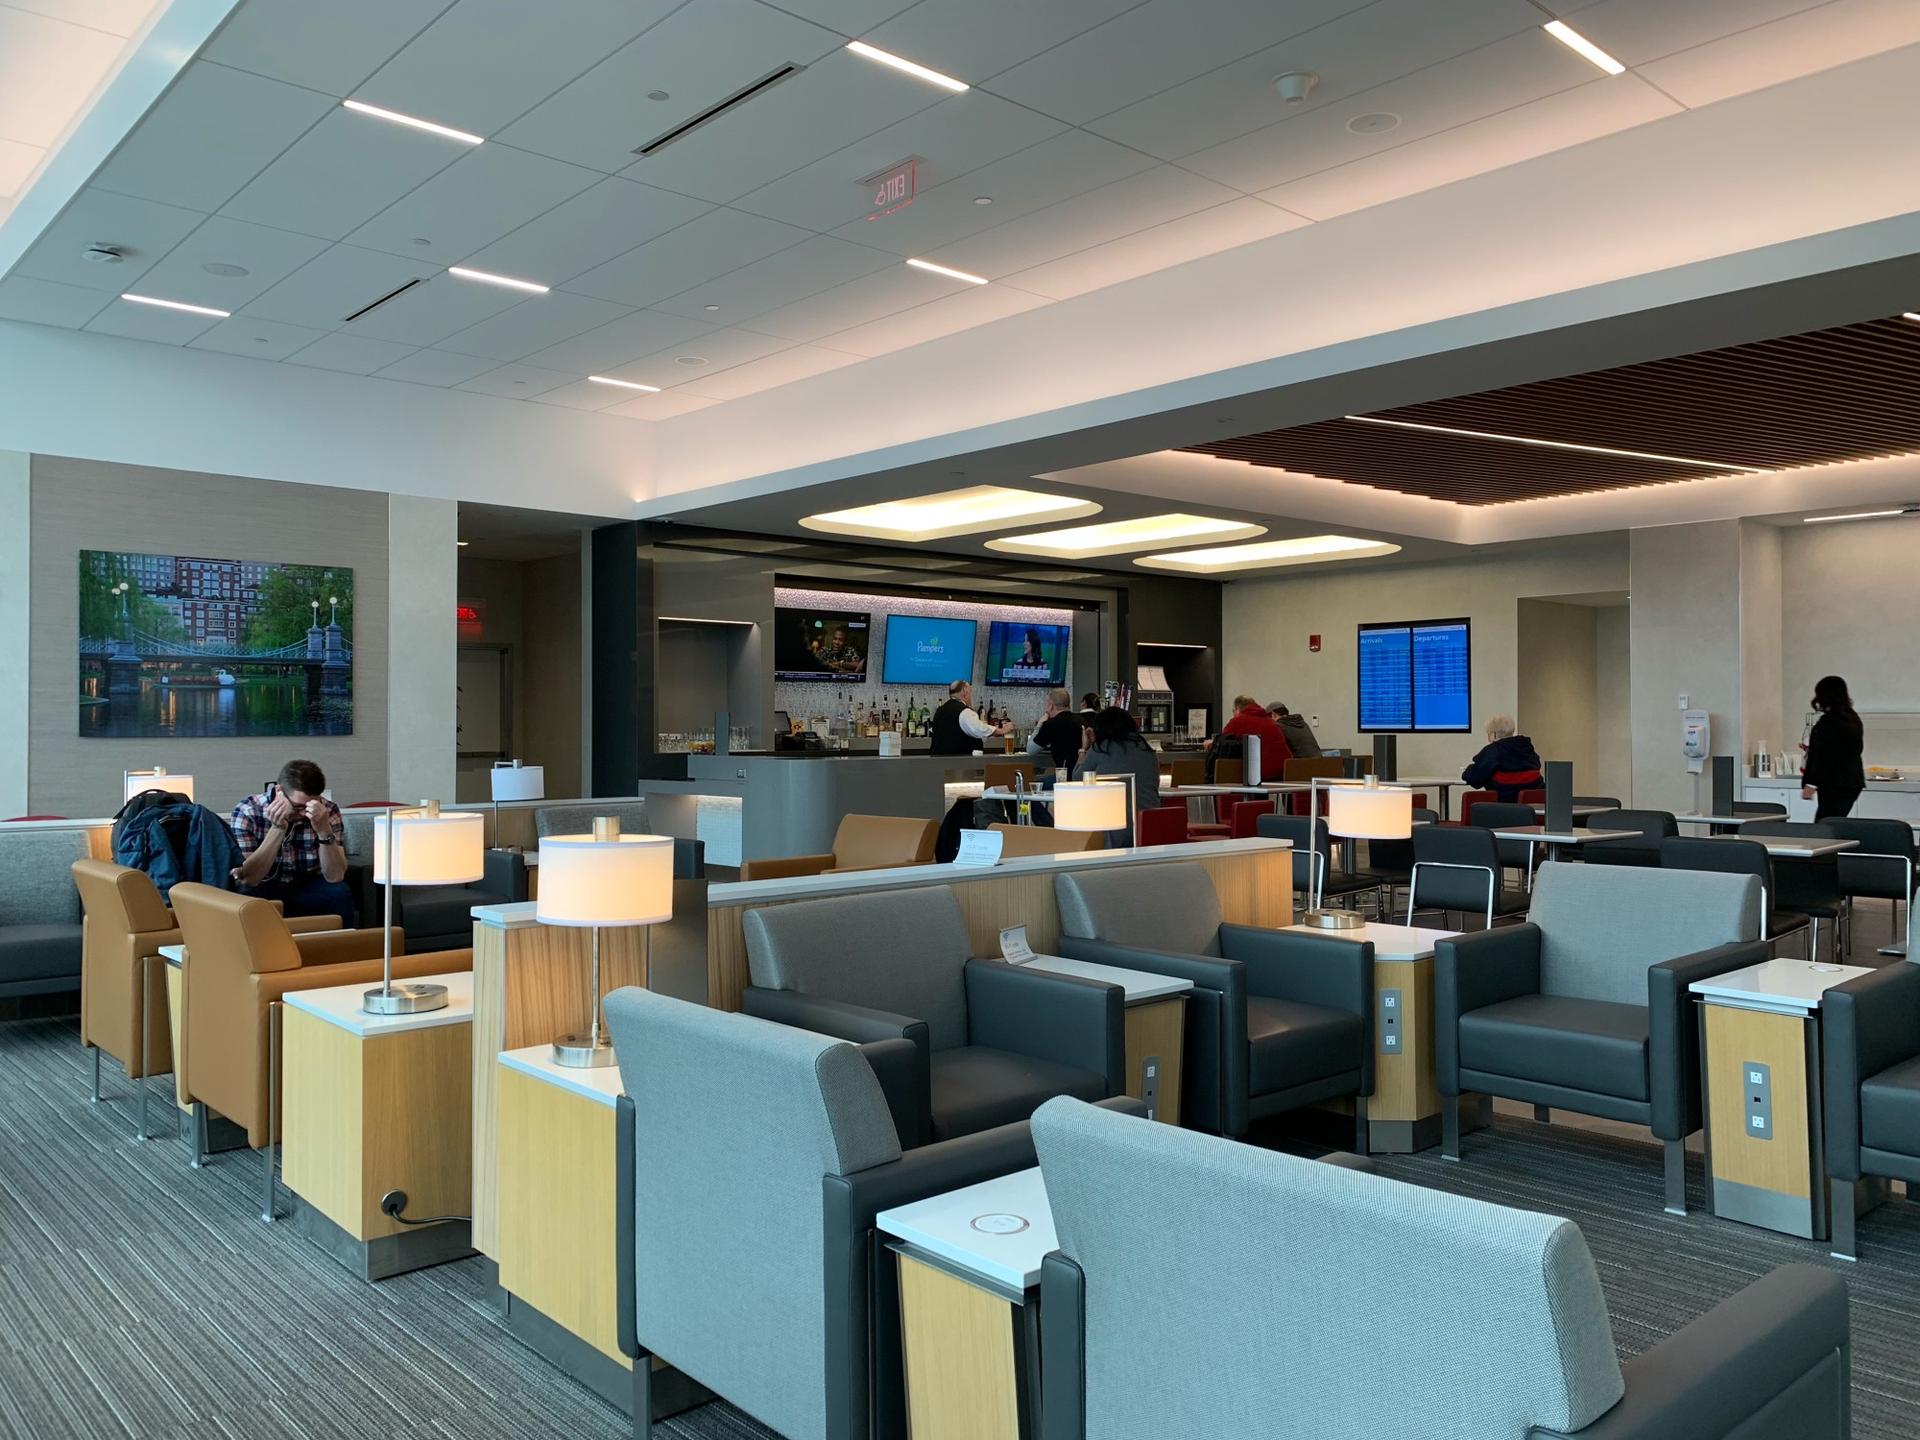 American Airlines Admirals Club (Gate B4) image 1 of 1